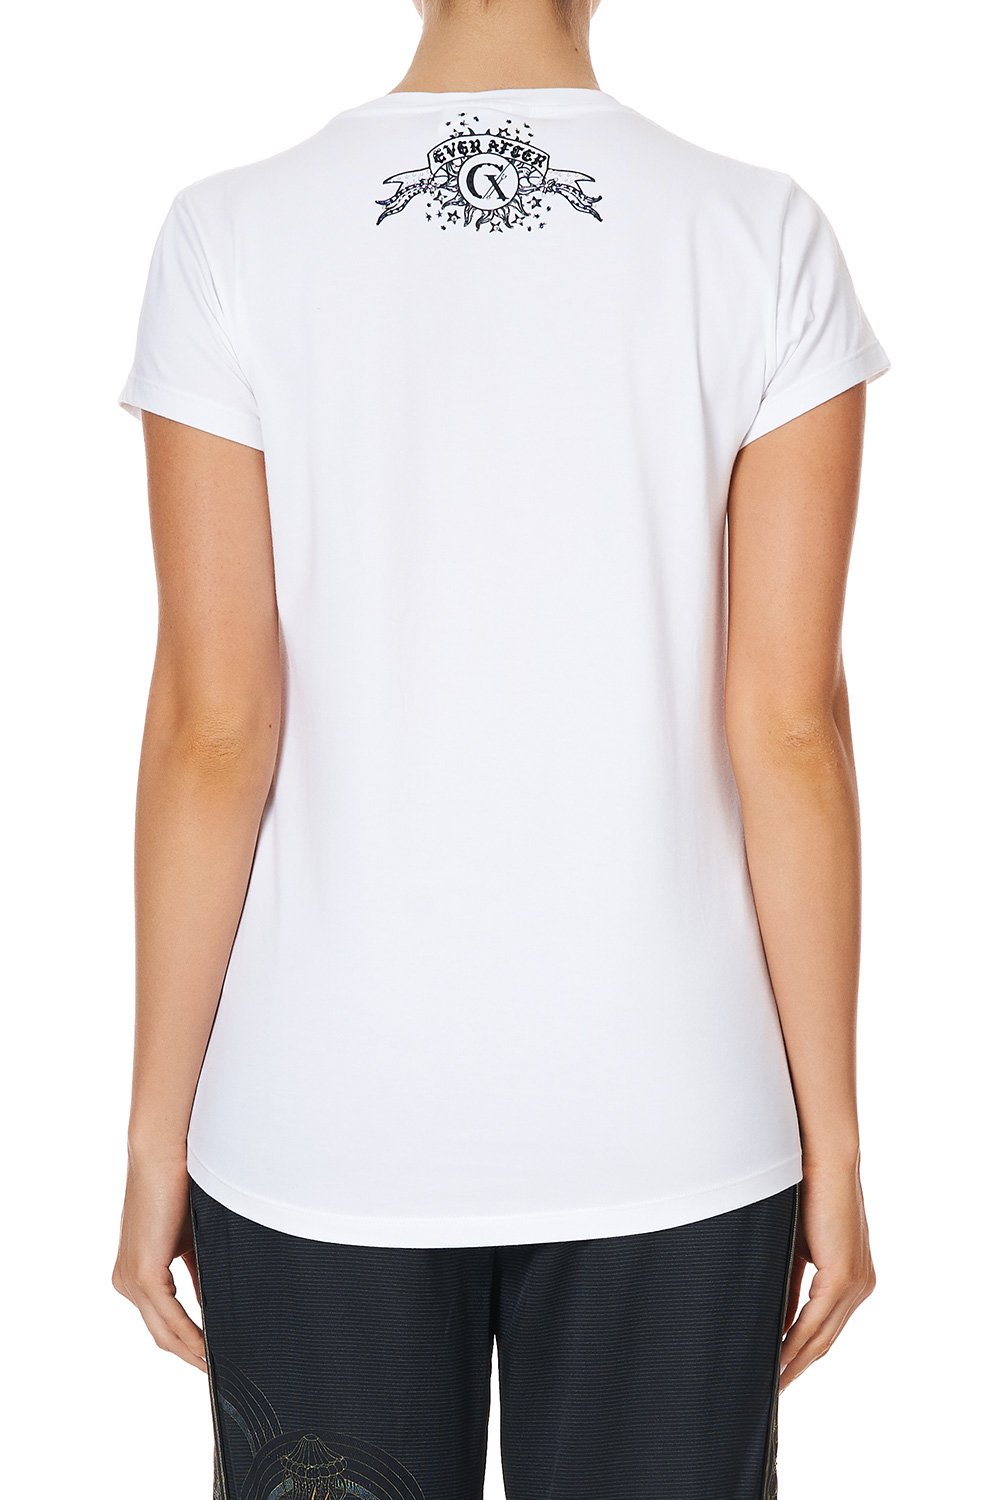 CURVED HEM FITTED TEE CAPRICORN